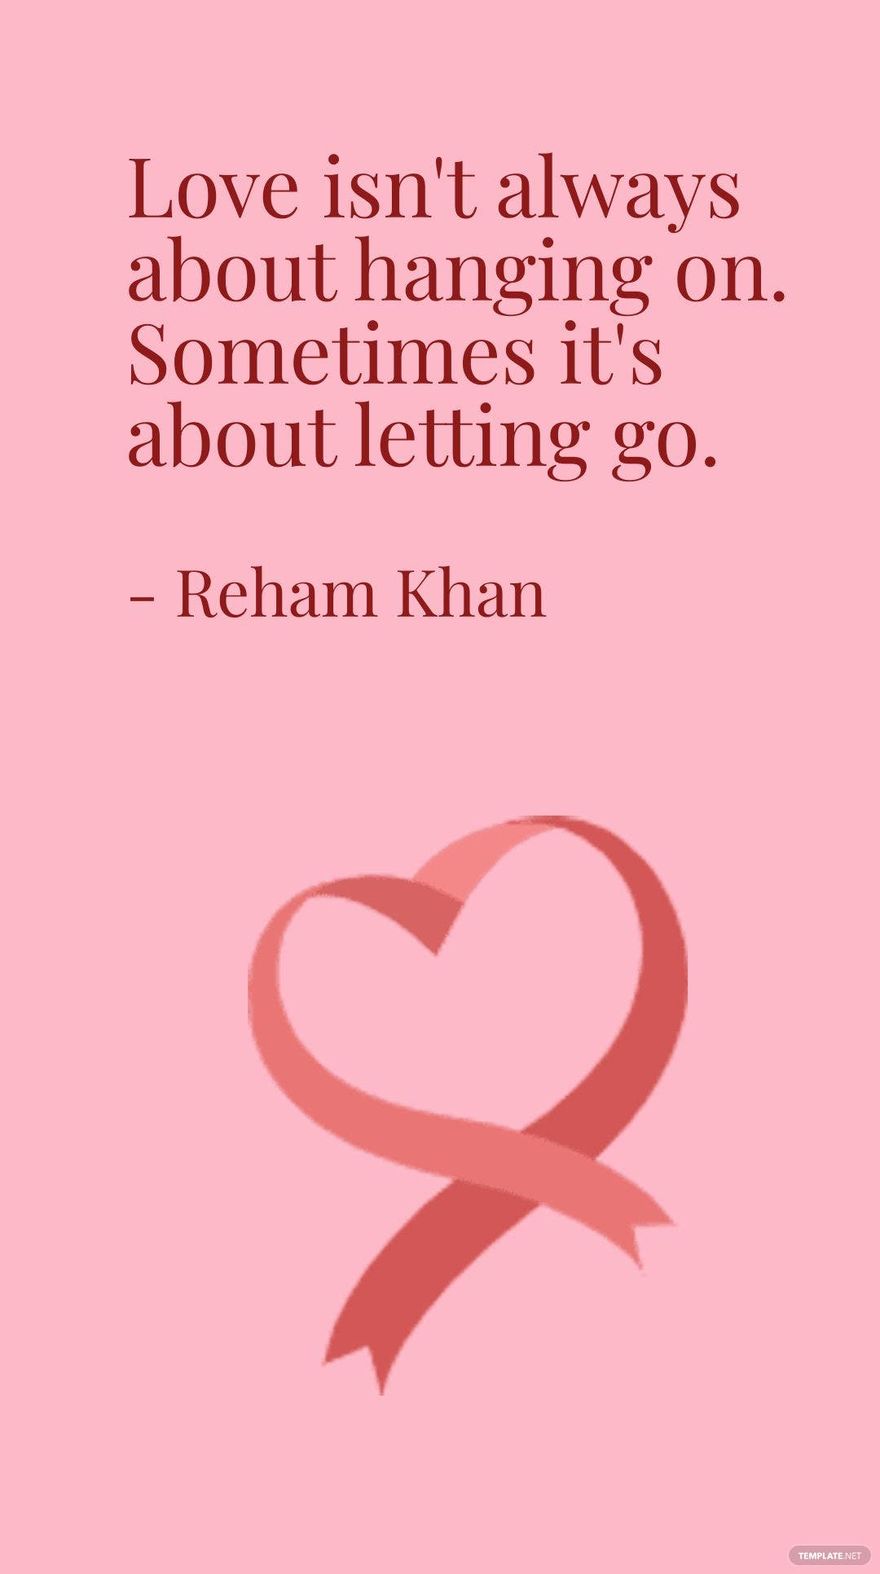 Reham Khan - Love isn't always about hanging on. Sometimes it's about letting go.